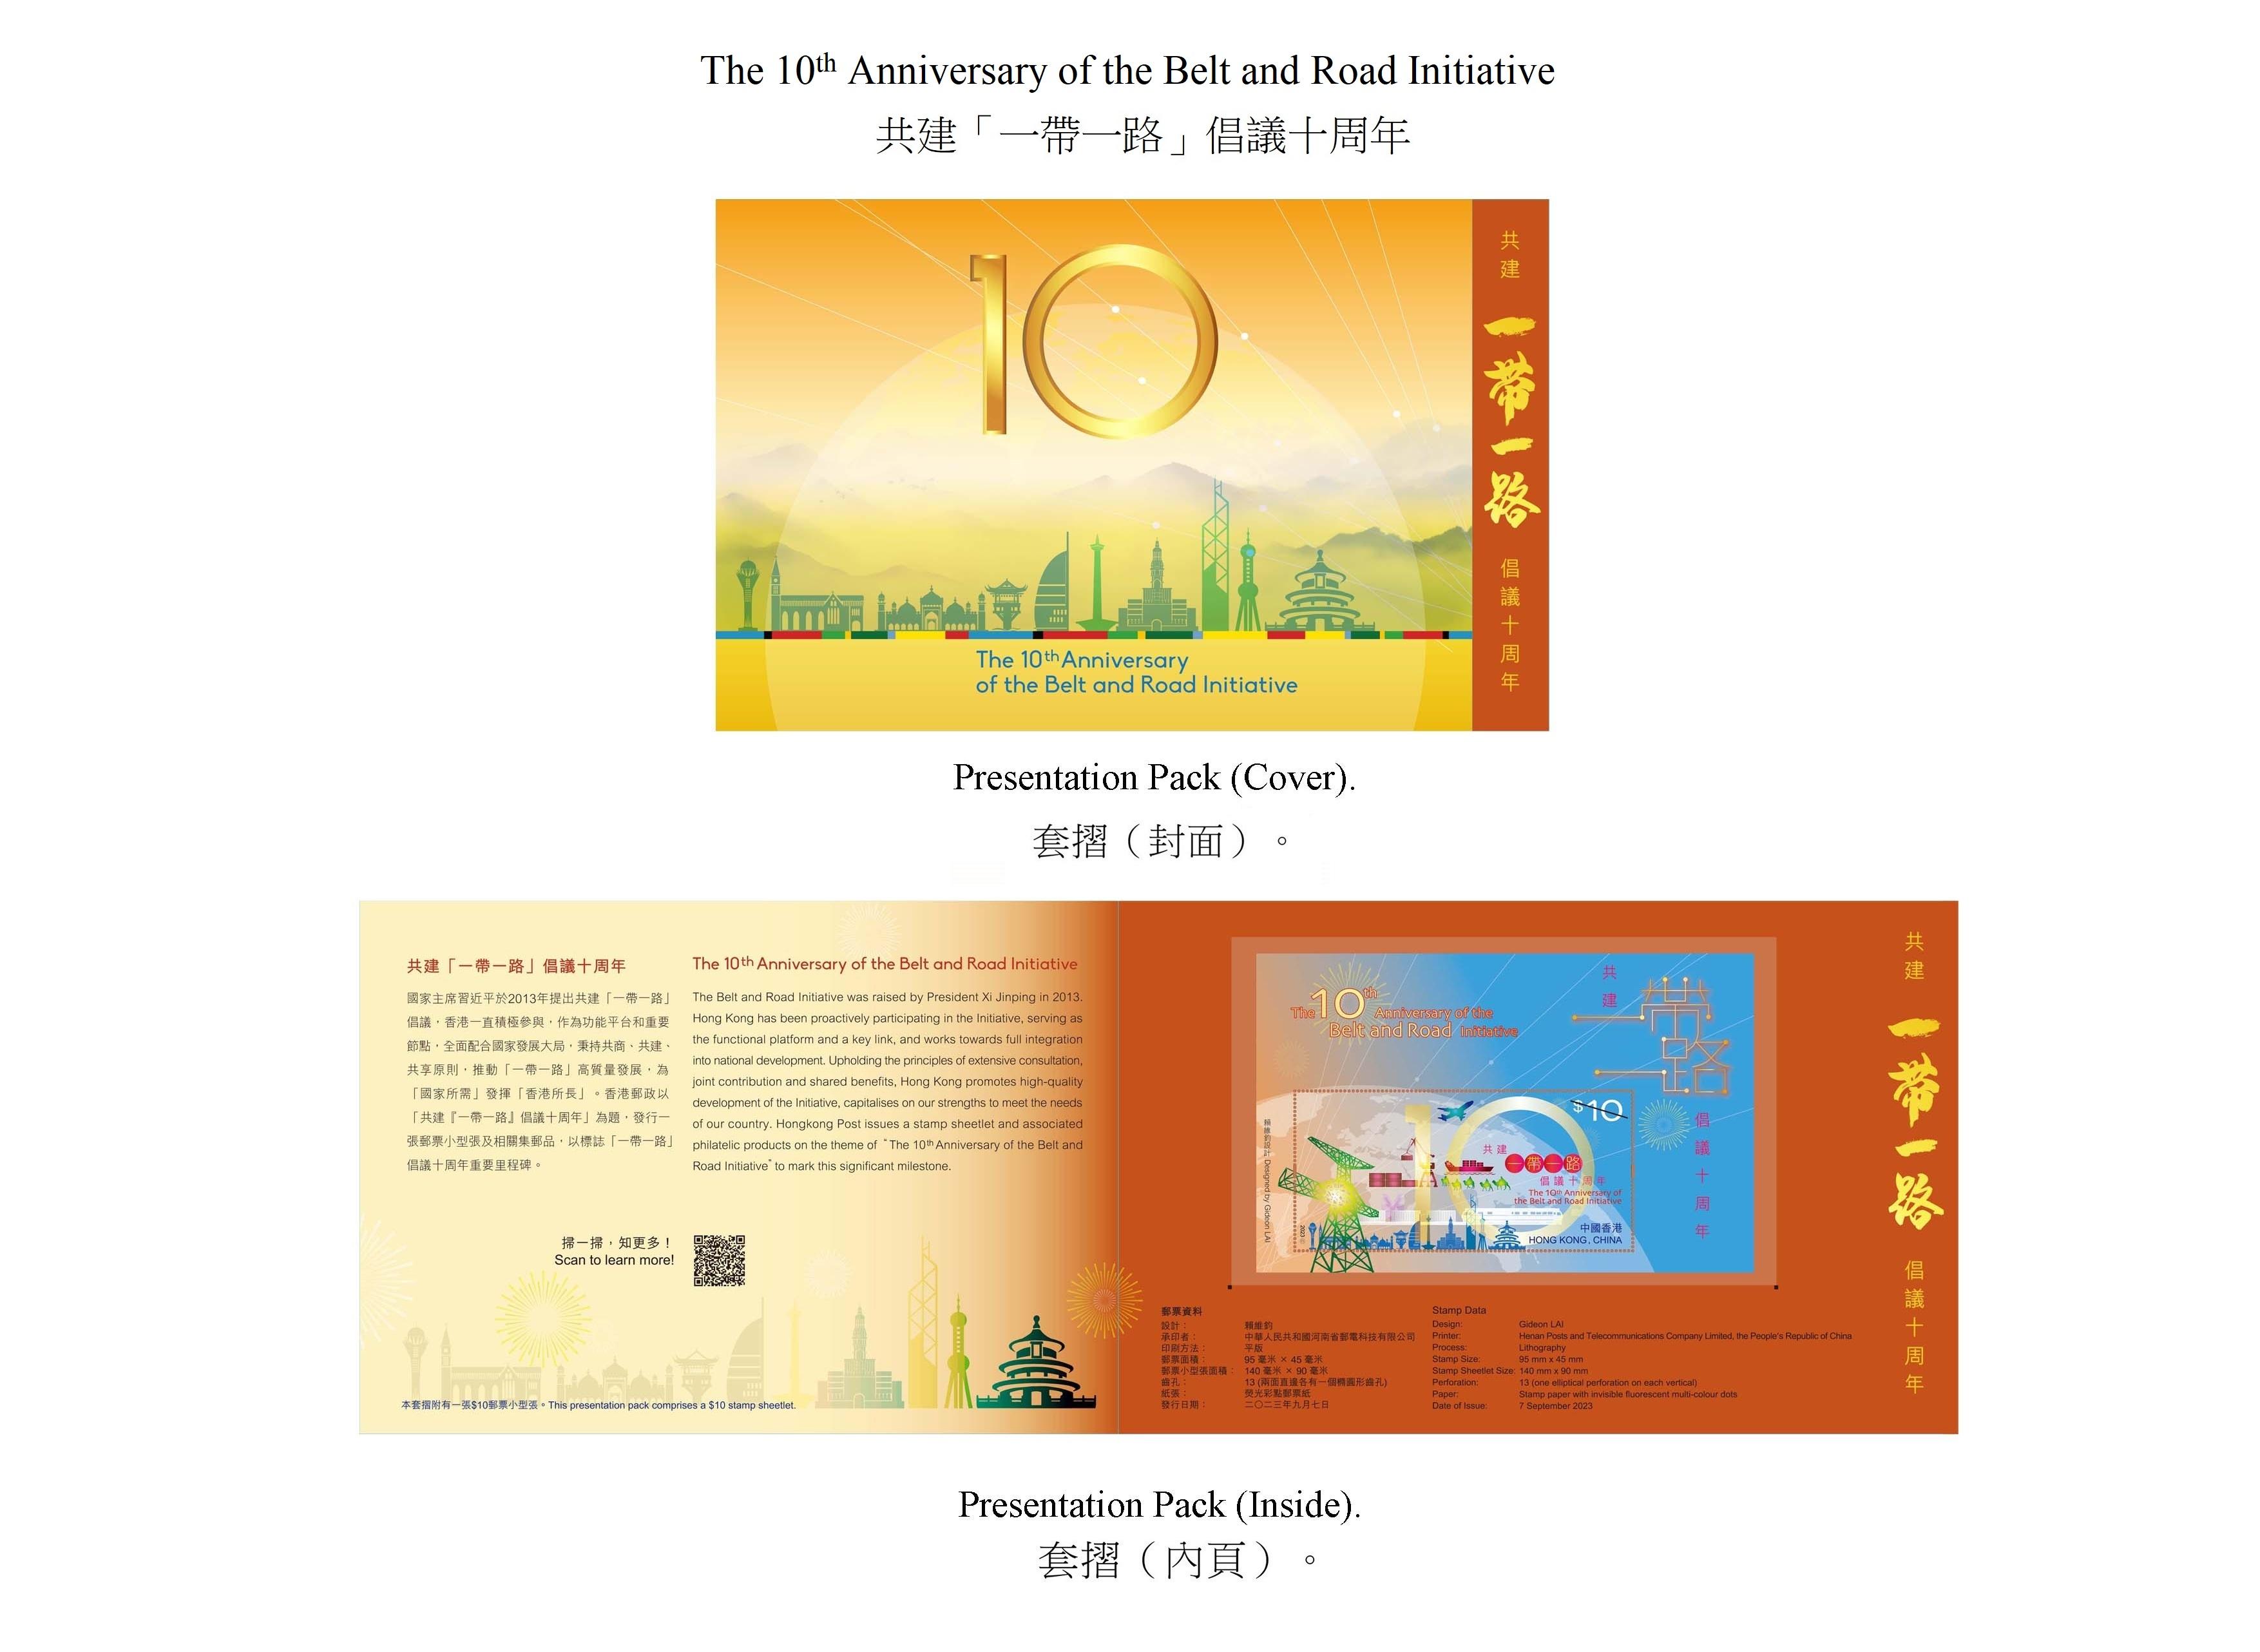 Hongkong Post will launch a commemorative stamp issue and associated philatelic products on the theme of "The 10th Anniversary of the Belt and Road Initiative" on September 7 (Thursday). Photos show the presentation pack.
